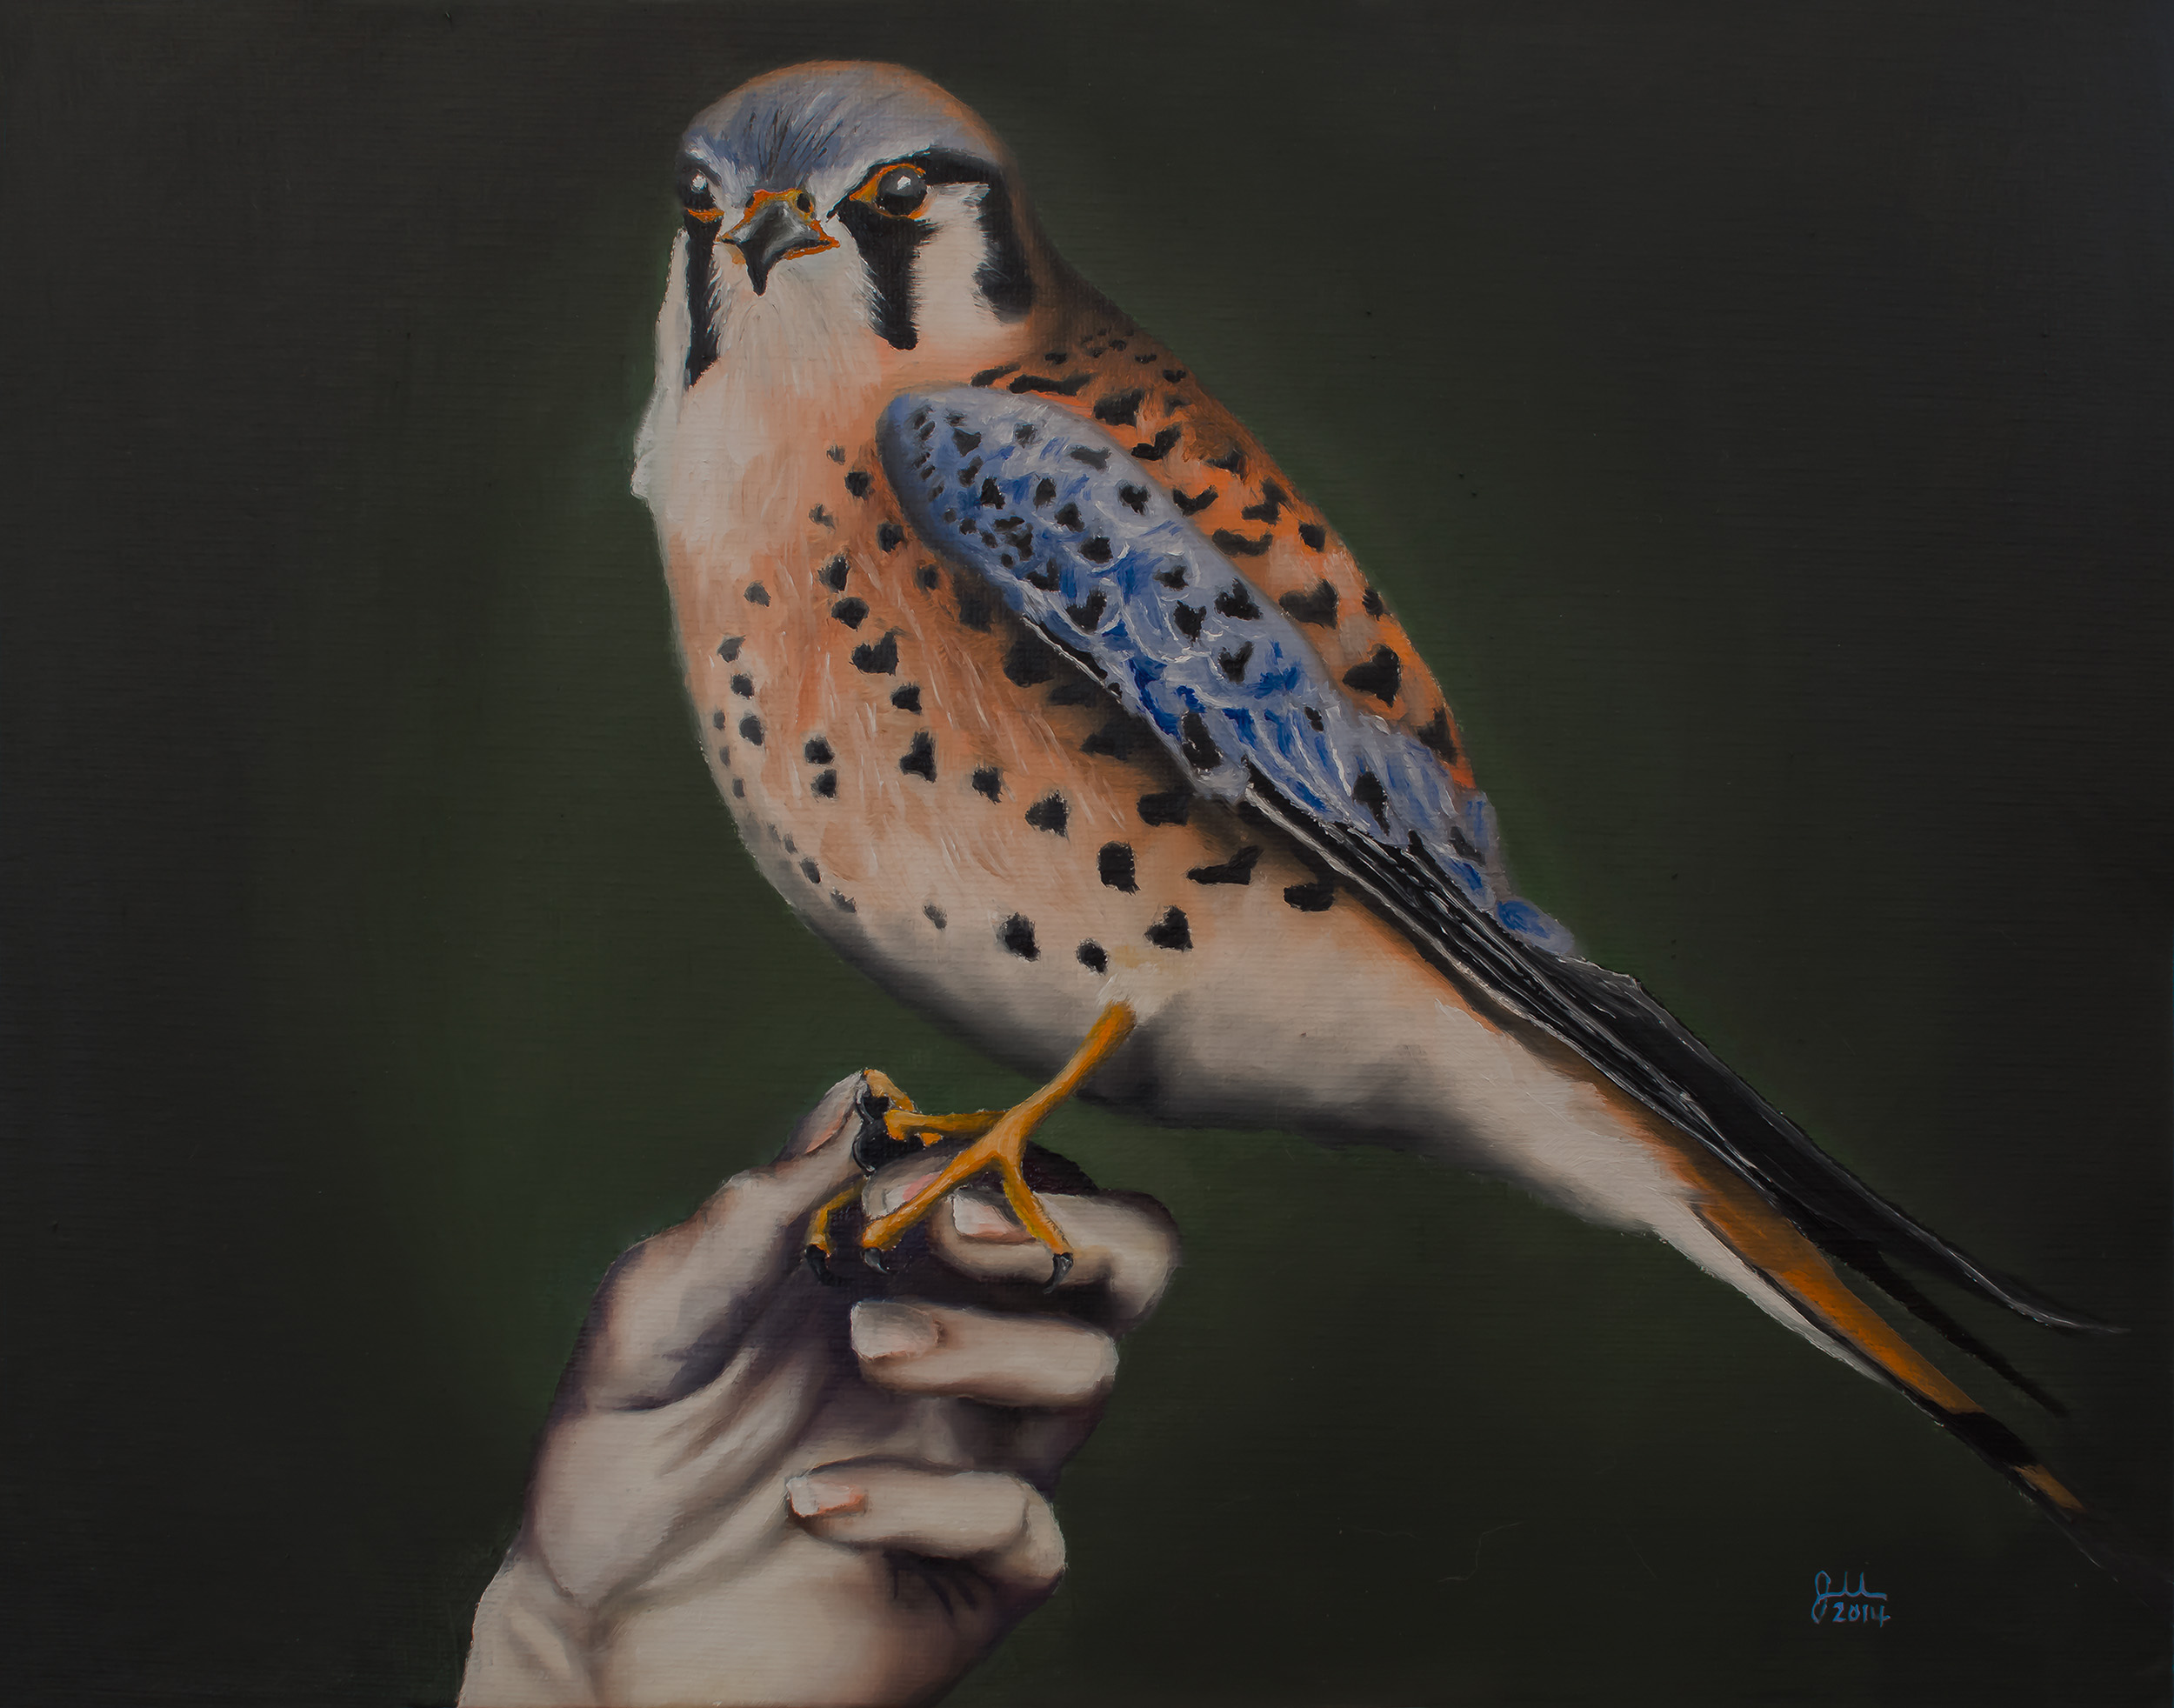   I WOULD BE A KESTREL   Oil on canvas panel, 11x14”, 2014 